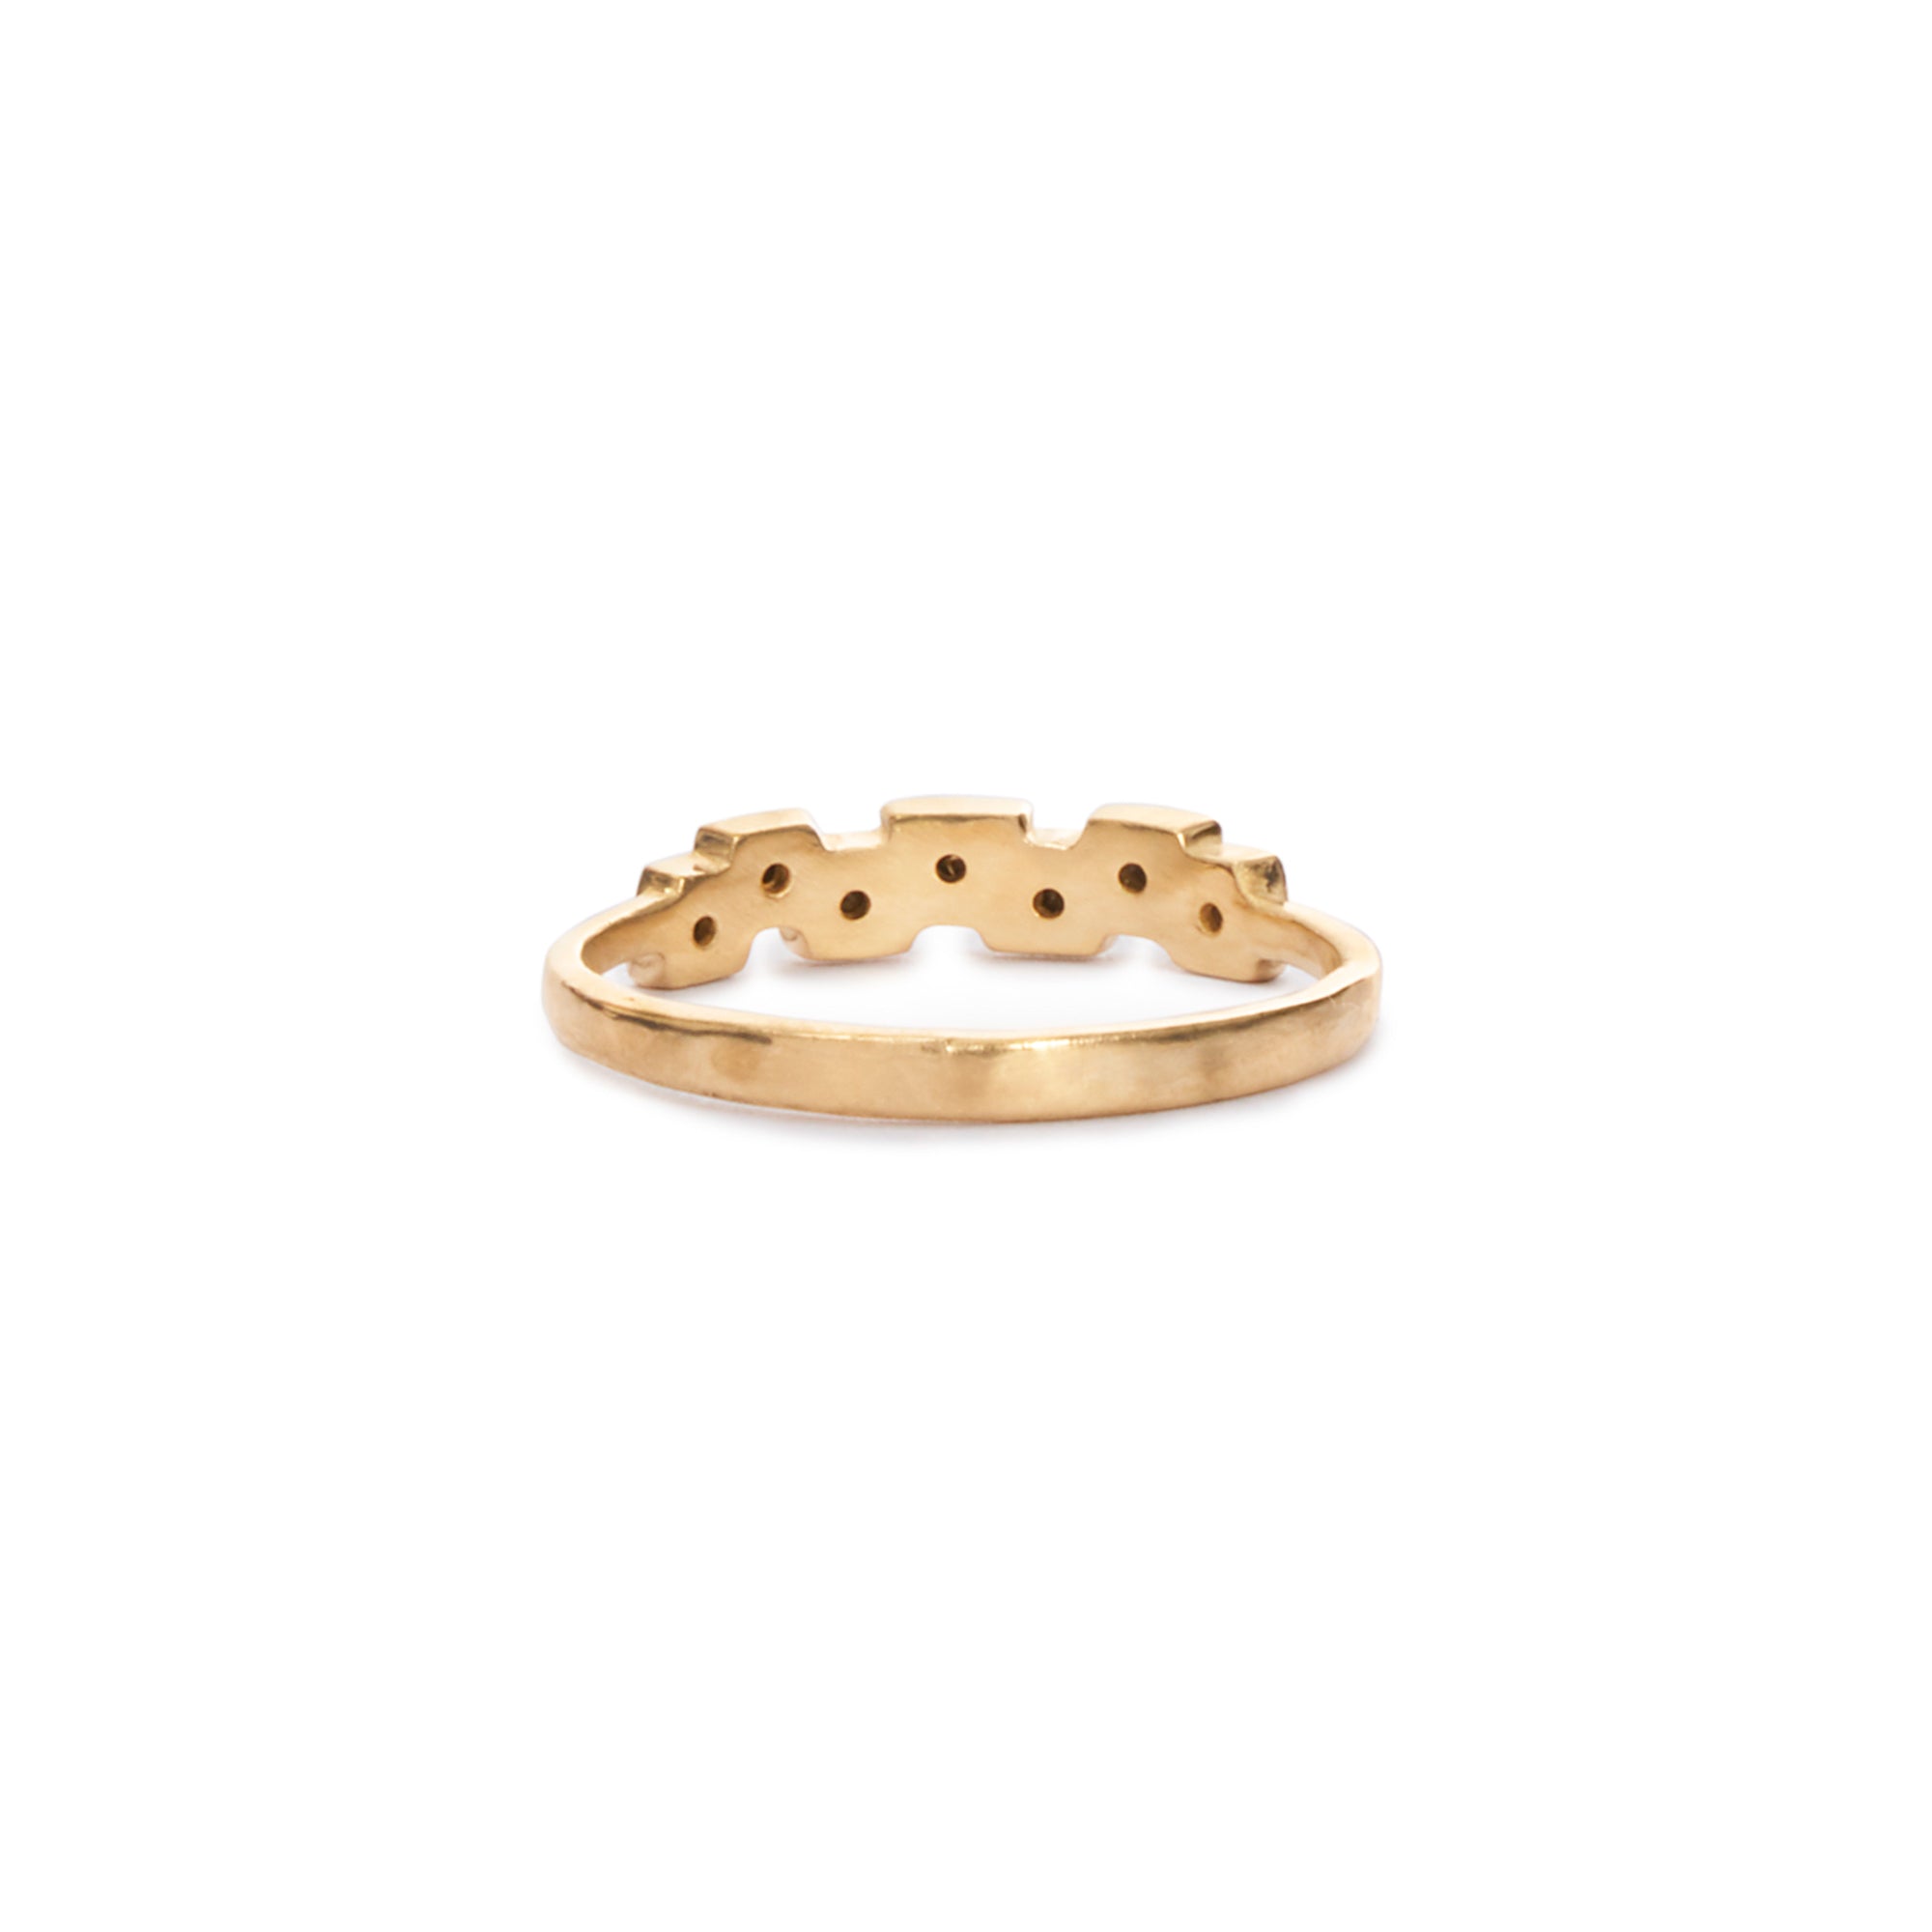 The Coral ring features 7 black diamonds flush set in textured 14k gold, with a hammered band. 